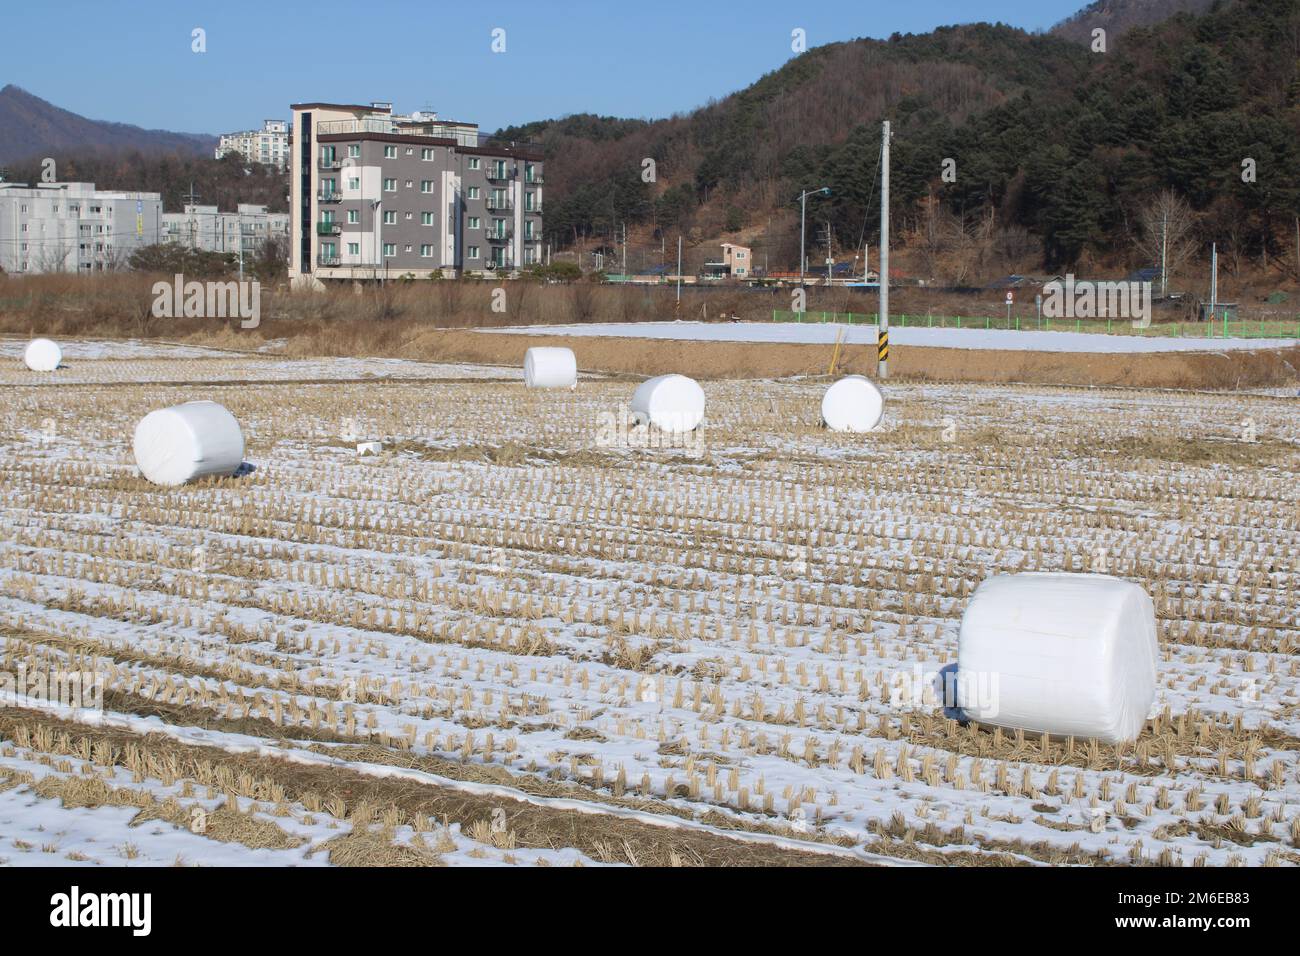 Marshmallow-like wrapped bales of hay on winter rice fields, in Korean countryside Stock Photo